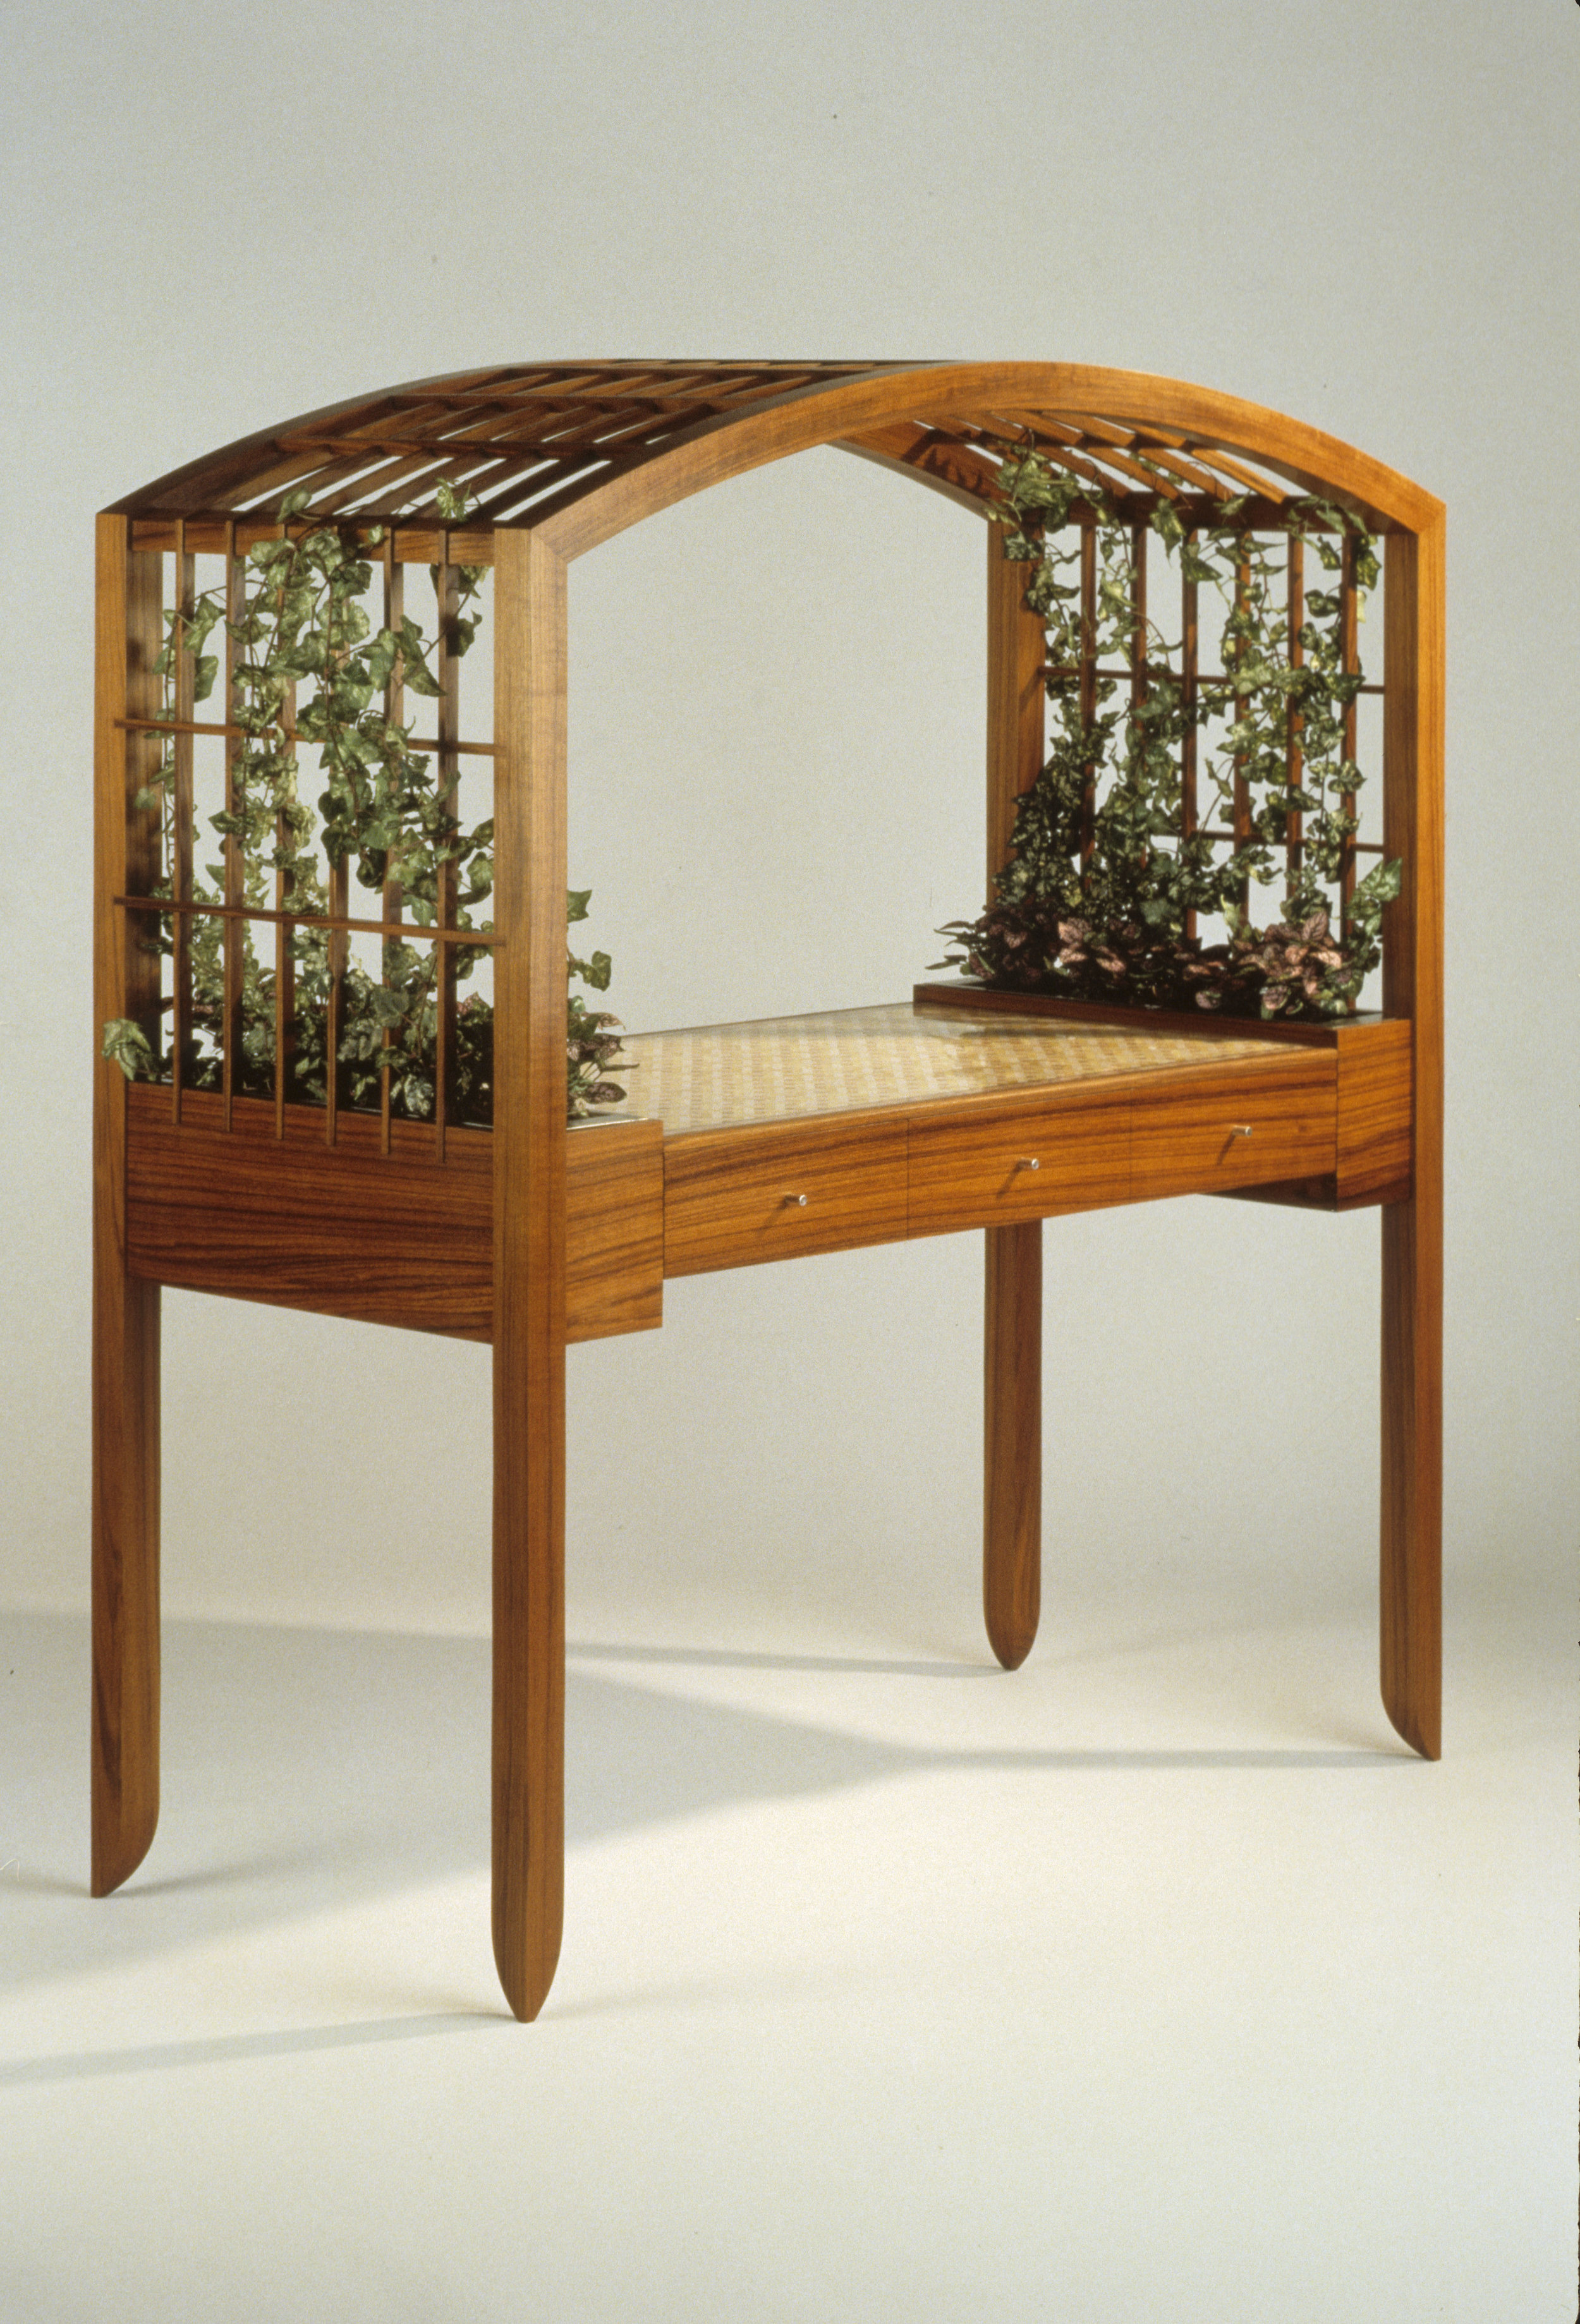 040 Desk with arbor and marble mosaic 1992.jpg